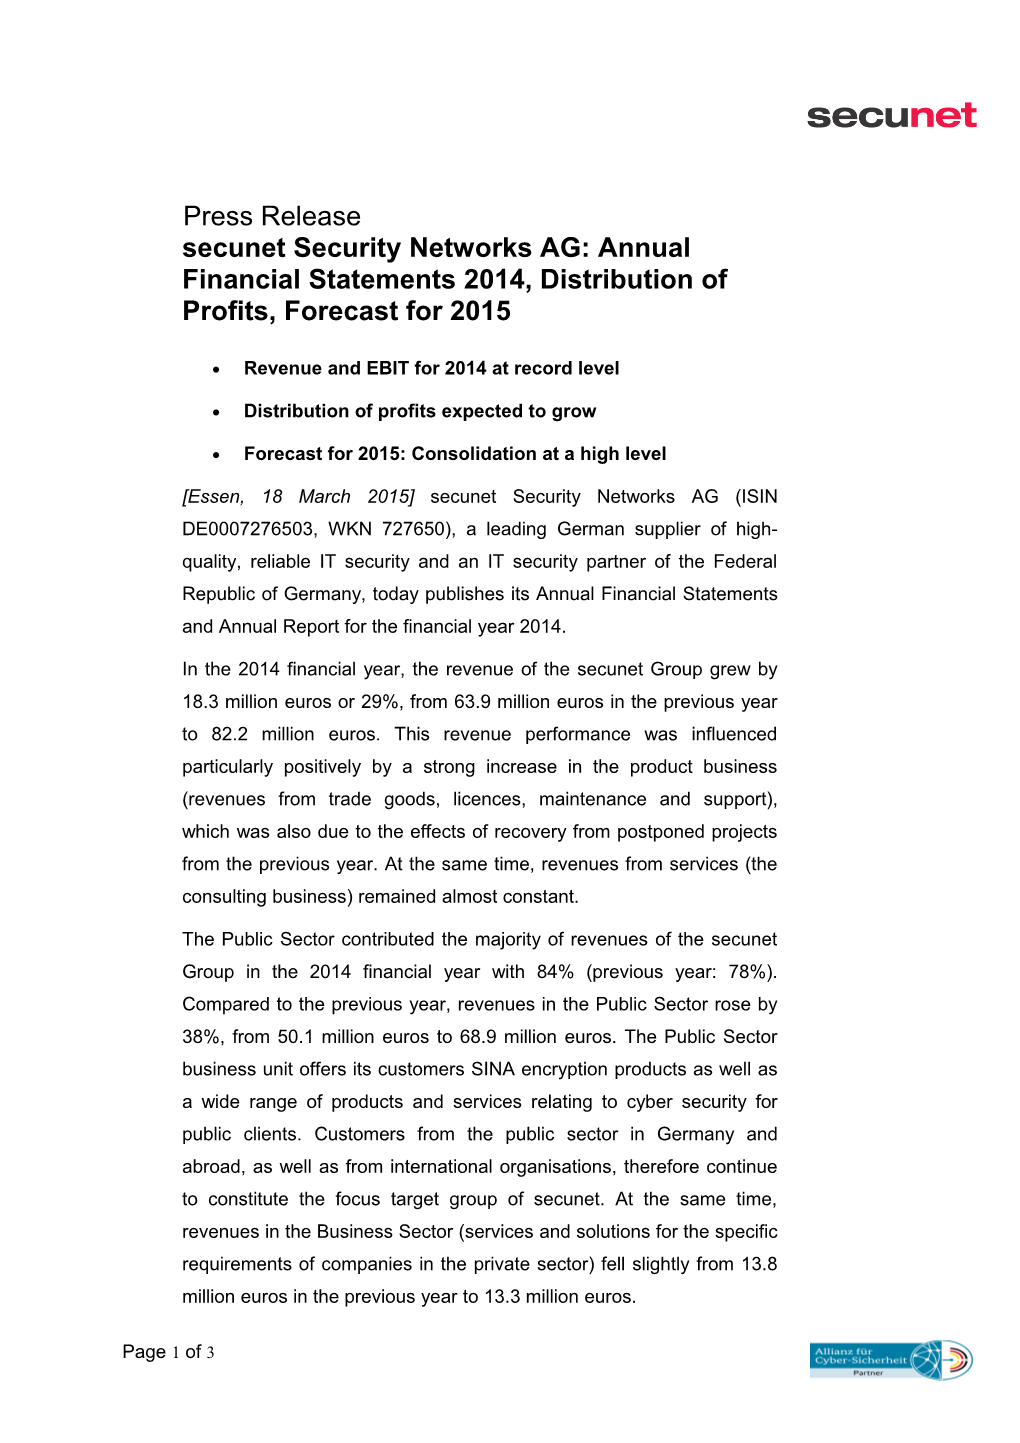 Secunet Security Networks AG: Annual Financial Statements 2014, Distribution of Profits